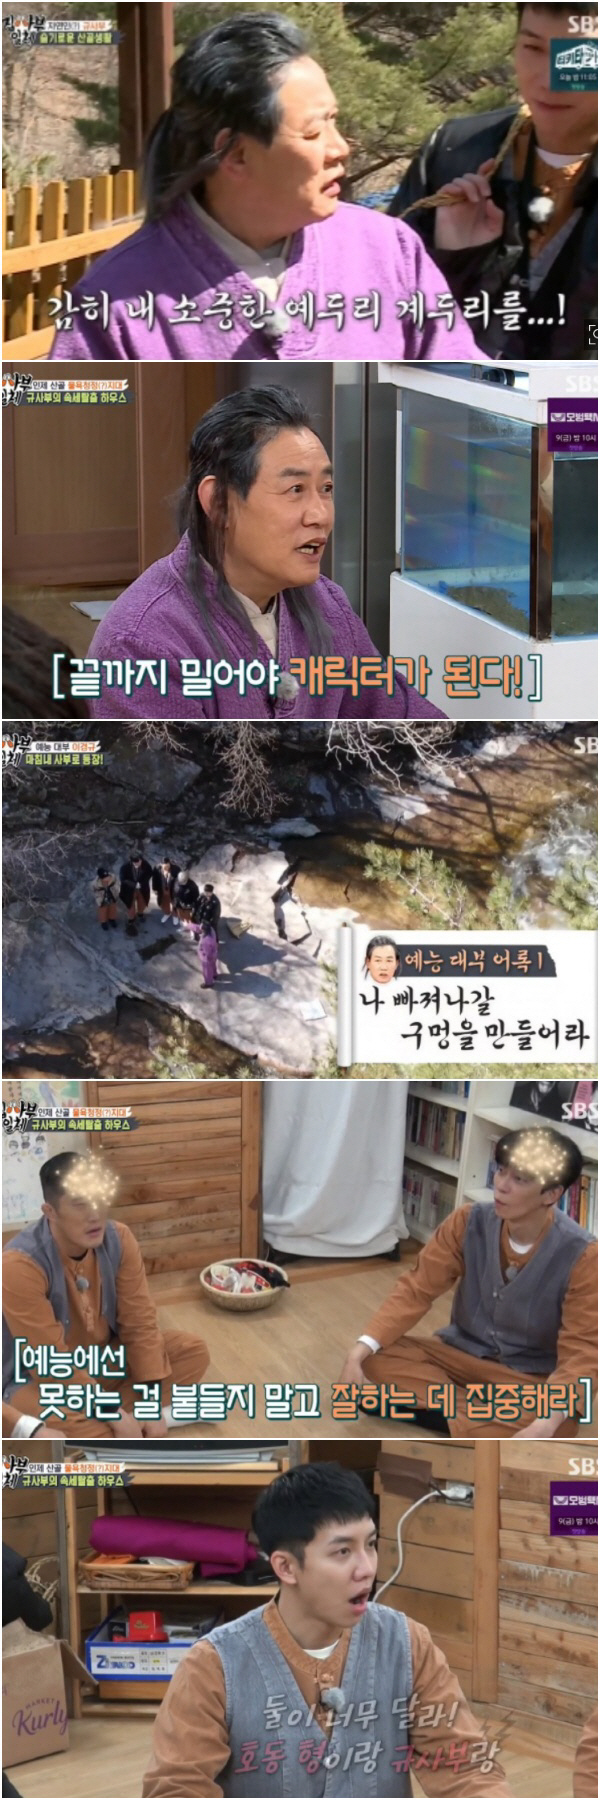 Entertainment The Godfather appeared on All The Butlers.In the SBS entertainment program All The Butlers broadcasted on the 4th, Lee Kyung-kyu appeared as a master and captivated viewers with the entertainment feeling of entertainment The Godfather.Lee Kyung-kyu, who called All The Butlers members in the mountain valley of Inje, Gangwon Province, said, I will unveil the entertainment 10 years of food.You will be able to eat for 10 years. But soon, I regret that I actually appeared.This is the perfect place to not be cursed. You can hear the story Lee Kyung-kyu is working hard.If you dont laugh up to this point, its your fault, he said, giving off an extraordinary entertainment force (?) from the start.Asked what he thought when he was working on entertainment, he said, I think about when it will end.When I left work, I thought, I finished later than I thought. How do you get through getting rid of the fun while doing it? Lee Seung-gi asked, referring to the longevity programs Lee Kyung-kyu had done in the past.Lee Kyung-kyu said, If it is not fun, it can be swept away.If you think its over someday and then you have fun, you can do it again. Think youre going to go all five, but dont think youre going to go all the way.Dont give me a deal, he said, giving stone fastball advice.You cant be swayed by private feelings. Will my image be bad or better now? Of course it is.I have to drag the character to the end, he promised to catch the characters one by one to the members of All The Butlers.Lee Kyung-kyu described Chain Reaction as flower of entertainment, saying the most important thing in entertainment is Chain Reaction.Why did the Brave Girls get popular again? Maybe because of the soldiers Chain Reaction. I thought the soldiers would bring them back.The same goes for entertainment: Chain Reaction is the only way the program lives, the members live, and I live.The reason why there are so many cameras here is to catch Chain Reaction. Life is Chain Reaction. But I do not do Chain Reaction well. Instead, I carry a lot of Chain Reaction children. Lee Yoon-seok is good at Chain Reaction.But there are children who do Chain Reaction without soul. They are like booms. Lee Seung-gi, the official entertainer of Kang Ho-dong, said, Master Lee Kyung-kyu is the master of my entertainment master.But they are so different. All the concepts I knew were overturned. 